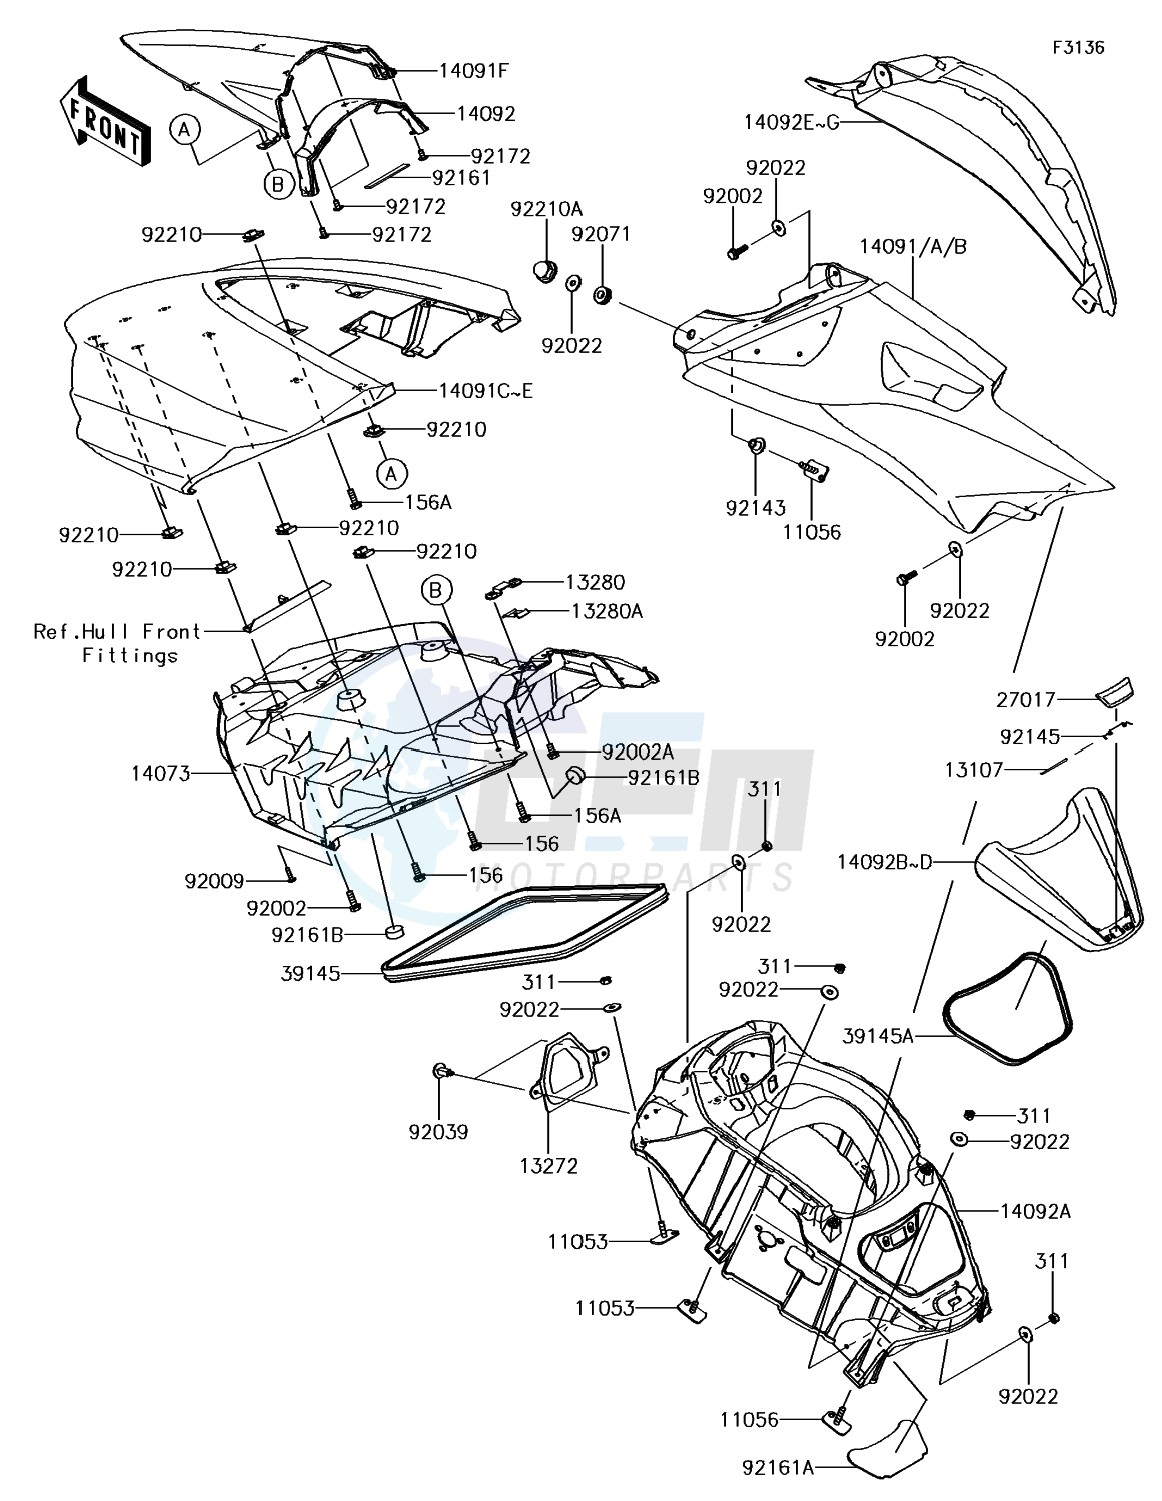 Hull Middle Fittings blueprint